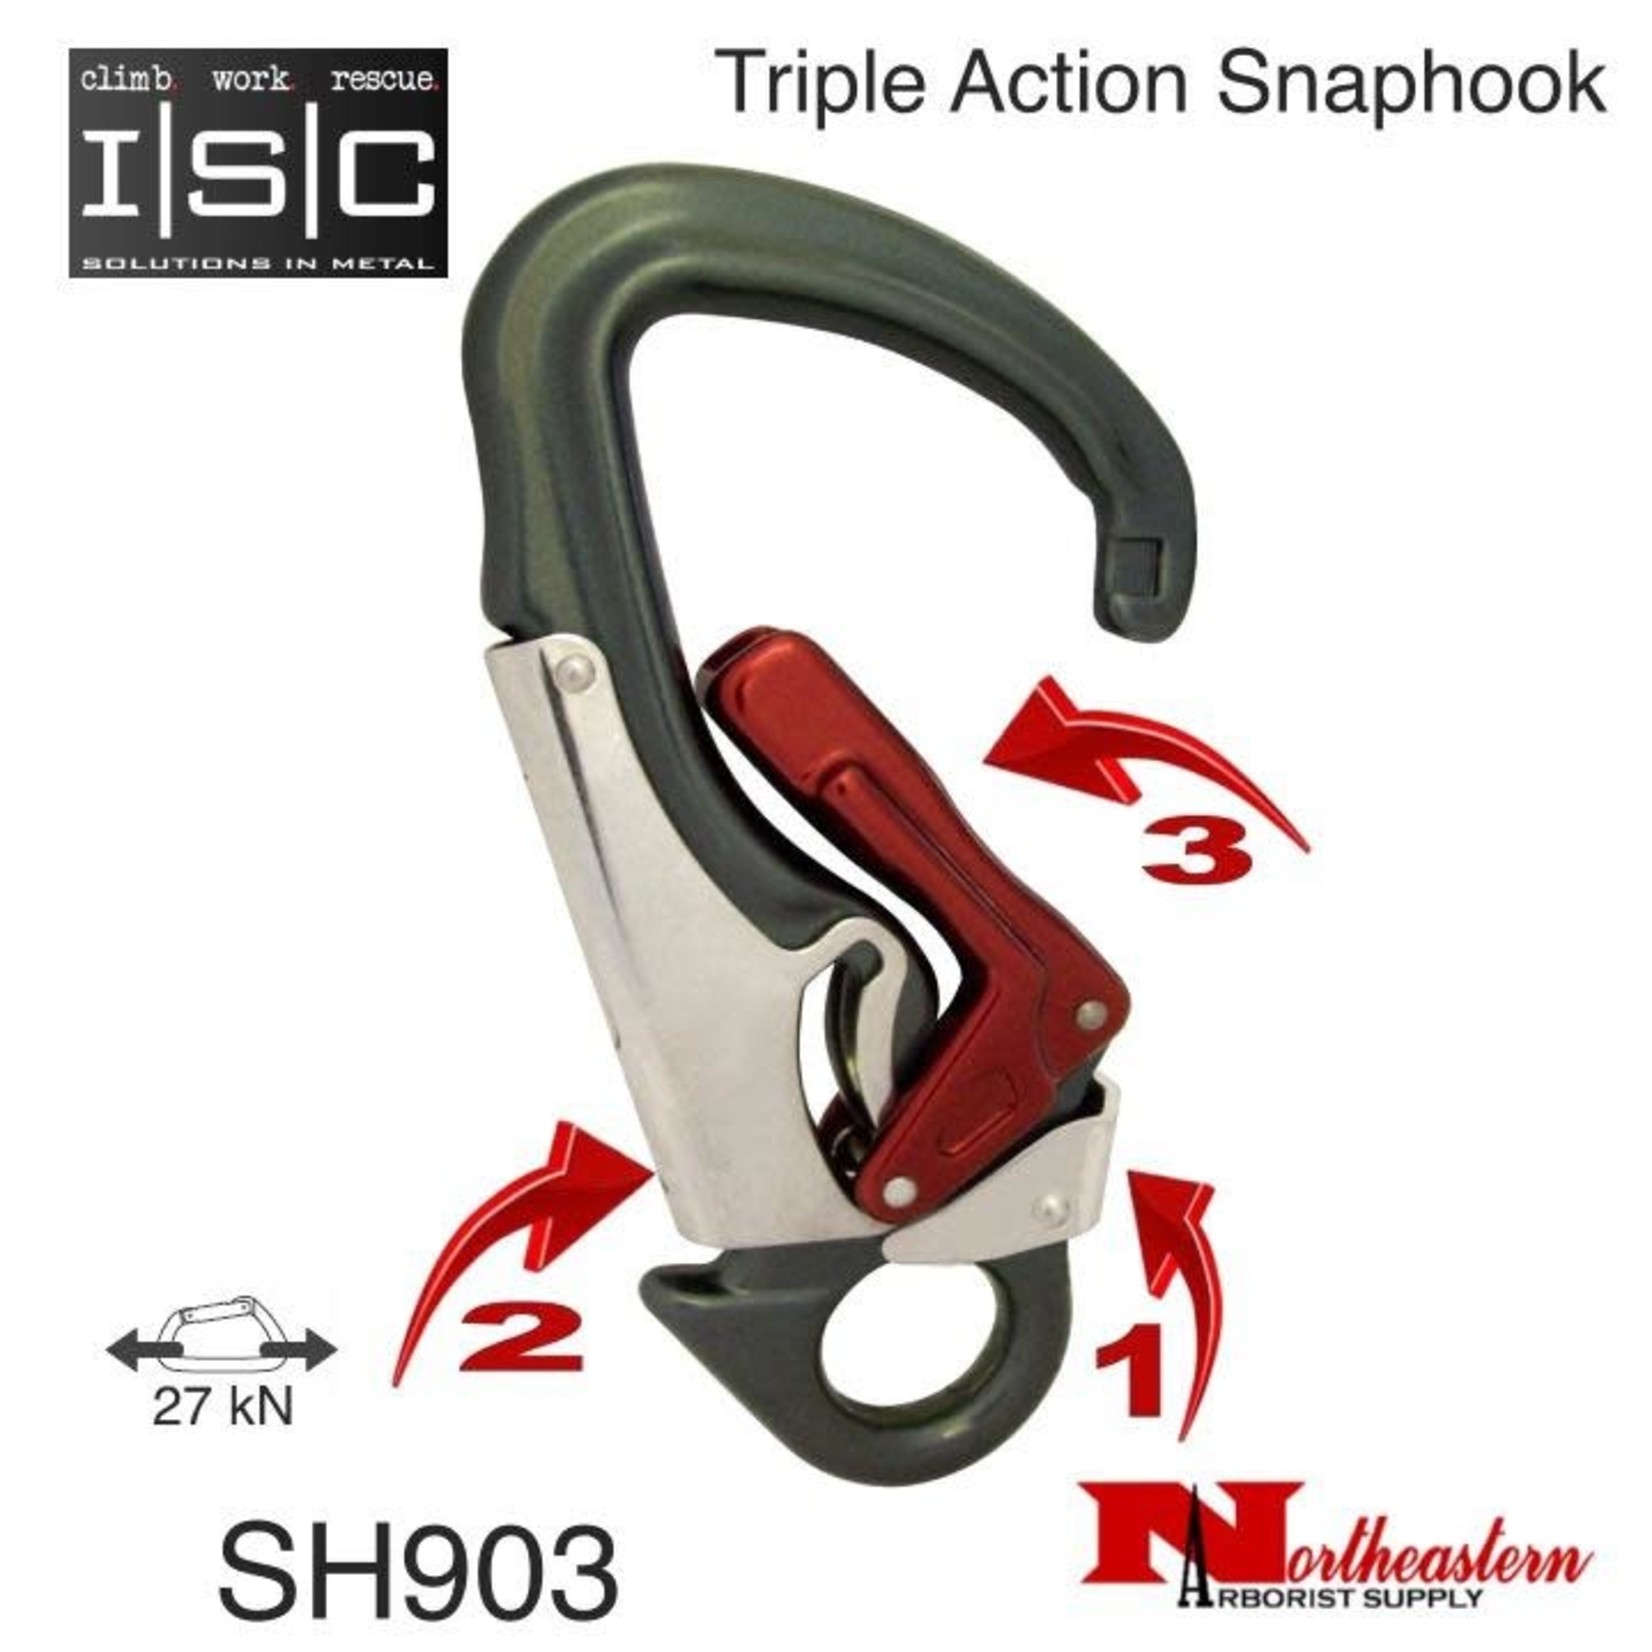 ISC ISC Triple Action Snaphook, SH903